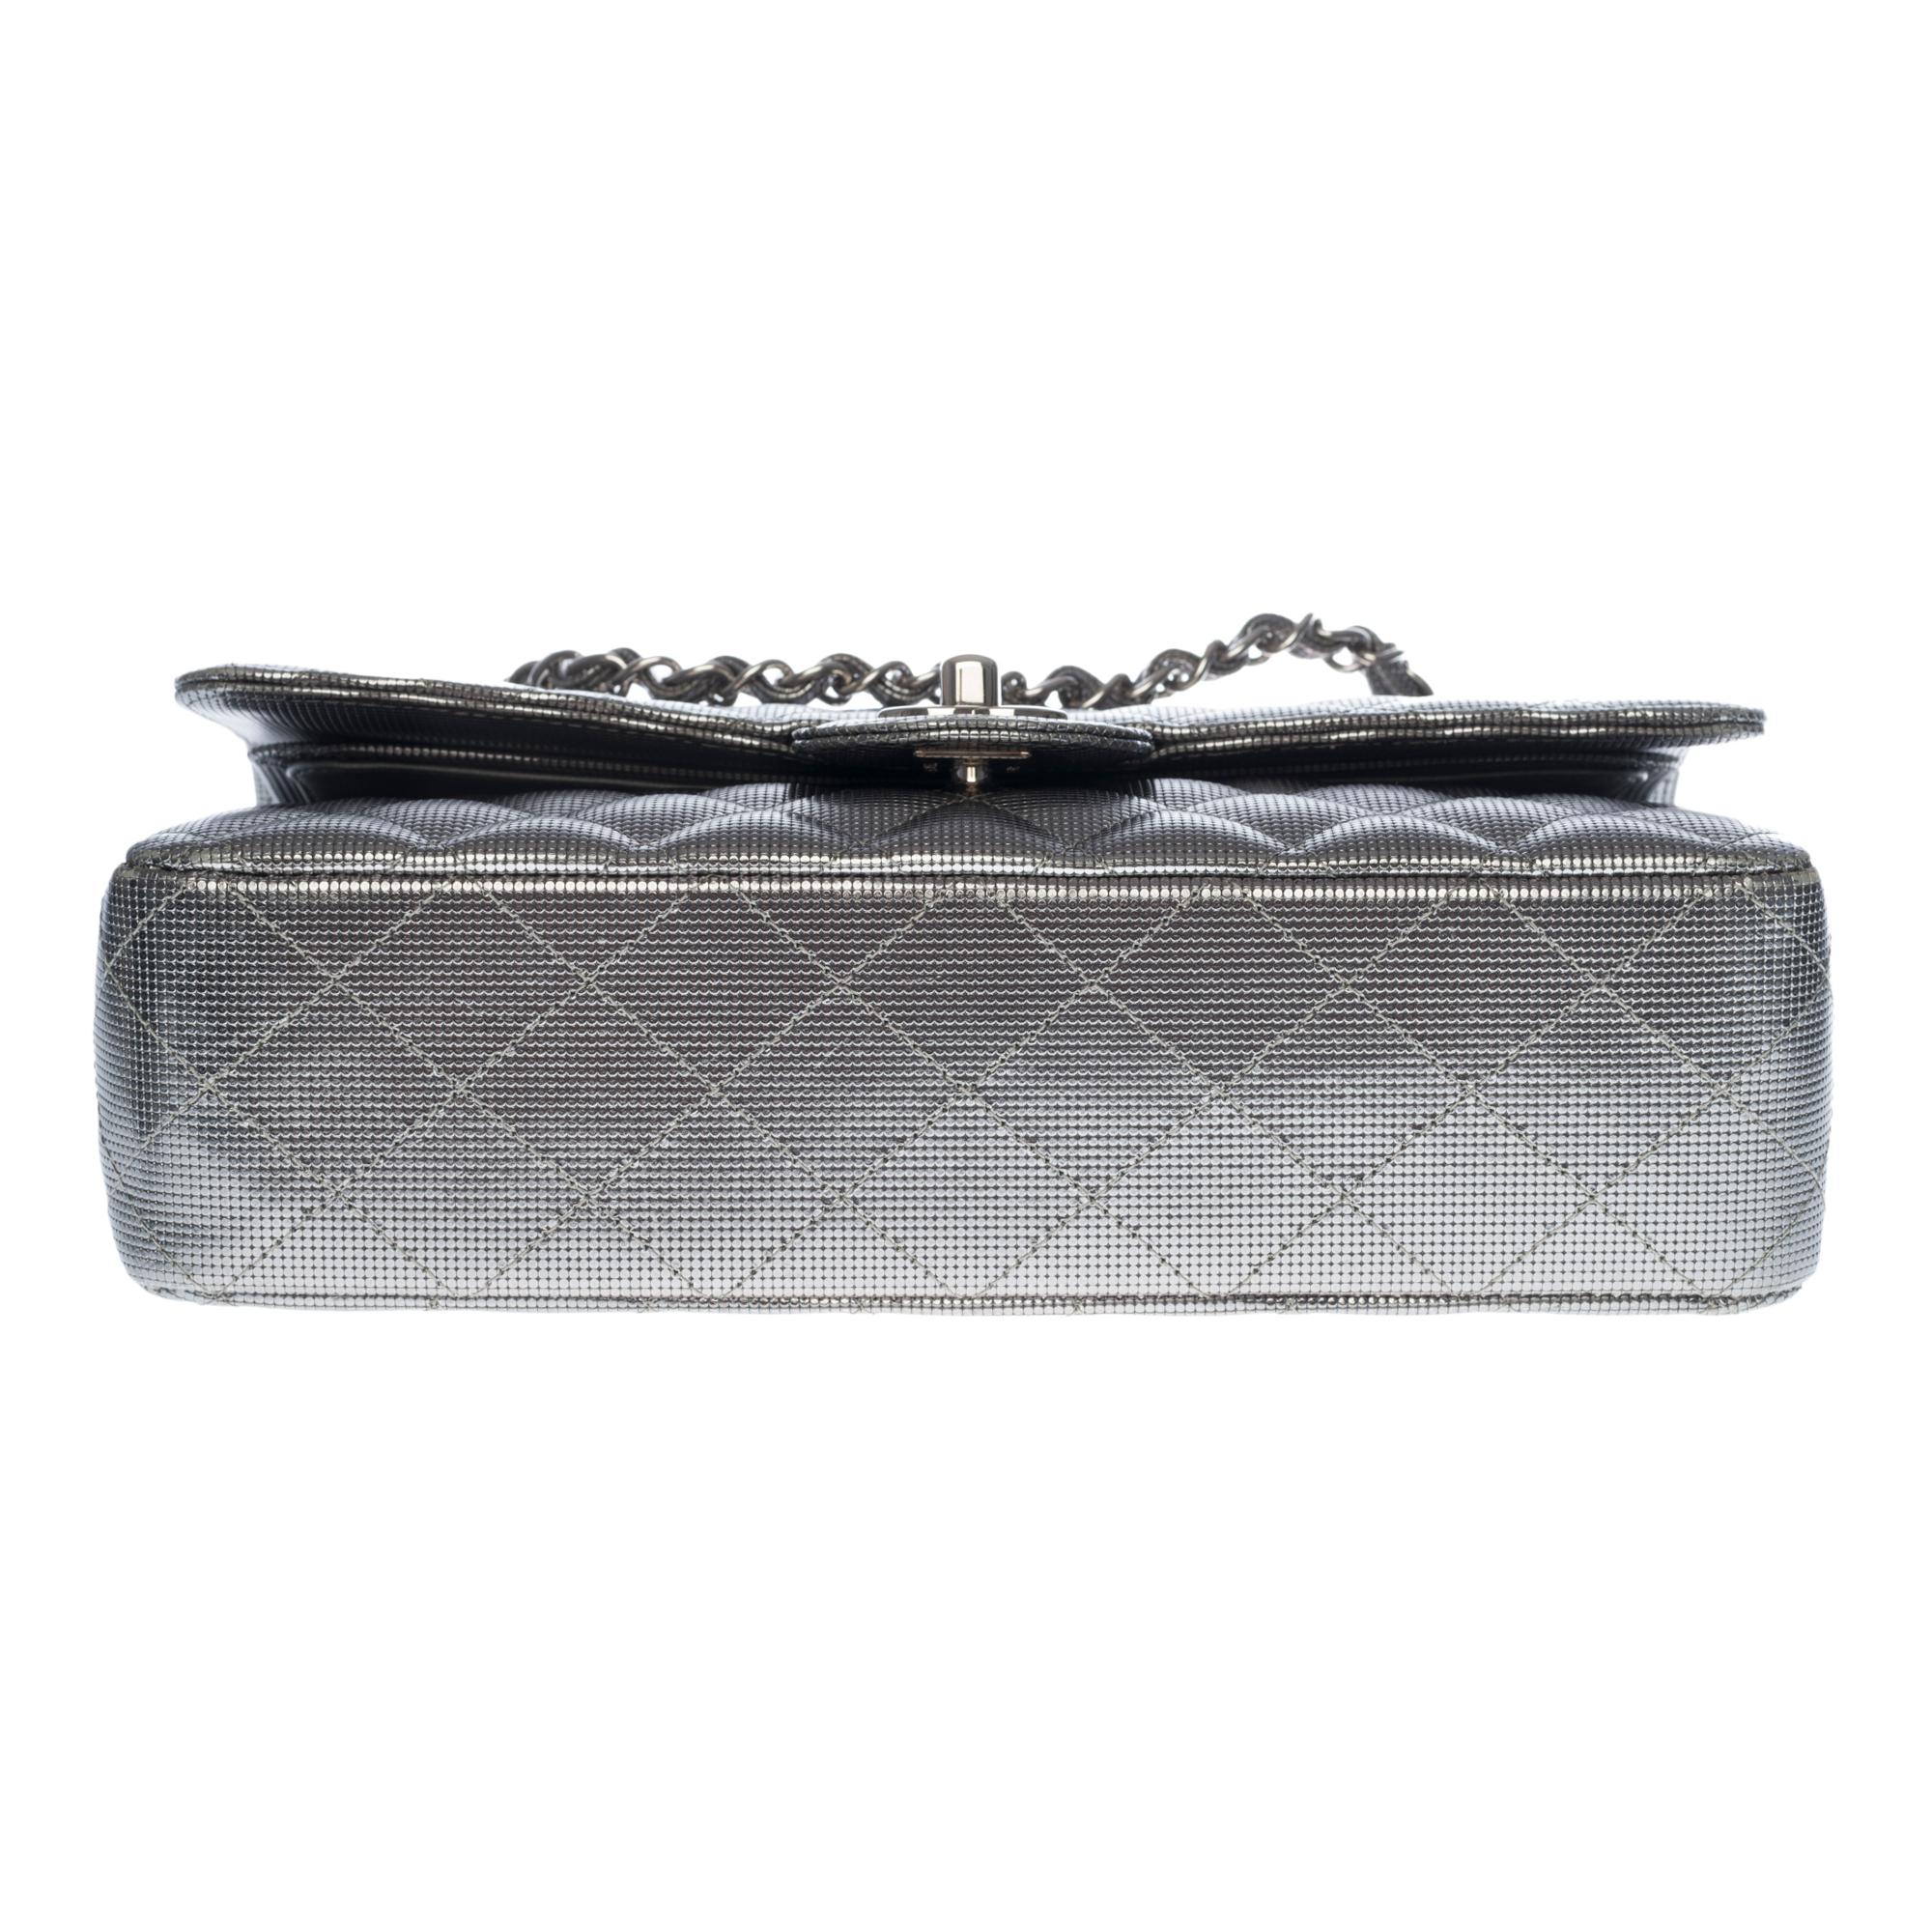 Chanel Timeless double flap Shoulder bag in Silver Metal quilted leather, SHW 5